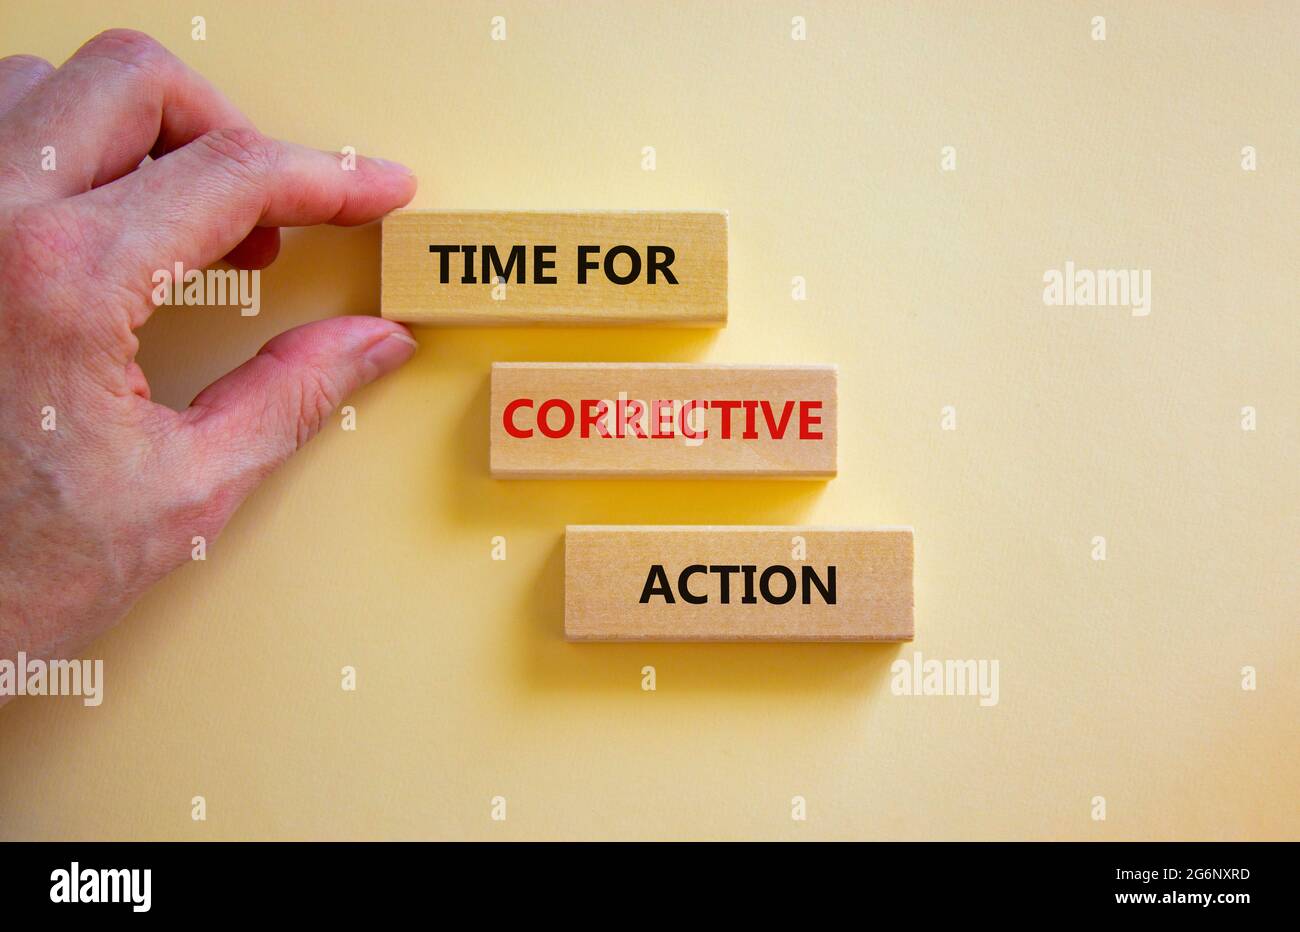 Time for corrective action symbol. Wooden blocks with words 'Time for corrective action' on a beautiful white background. Businessman hand. Business, Stock Photo